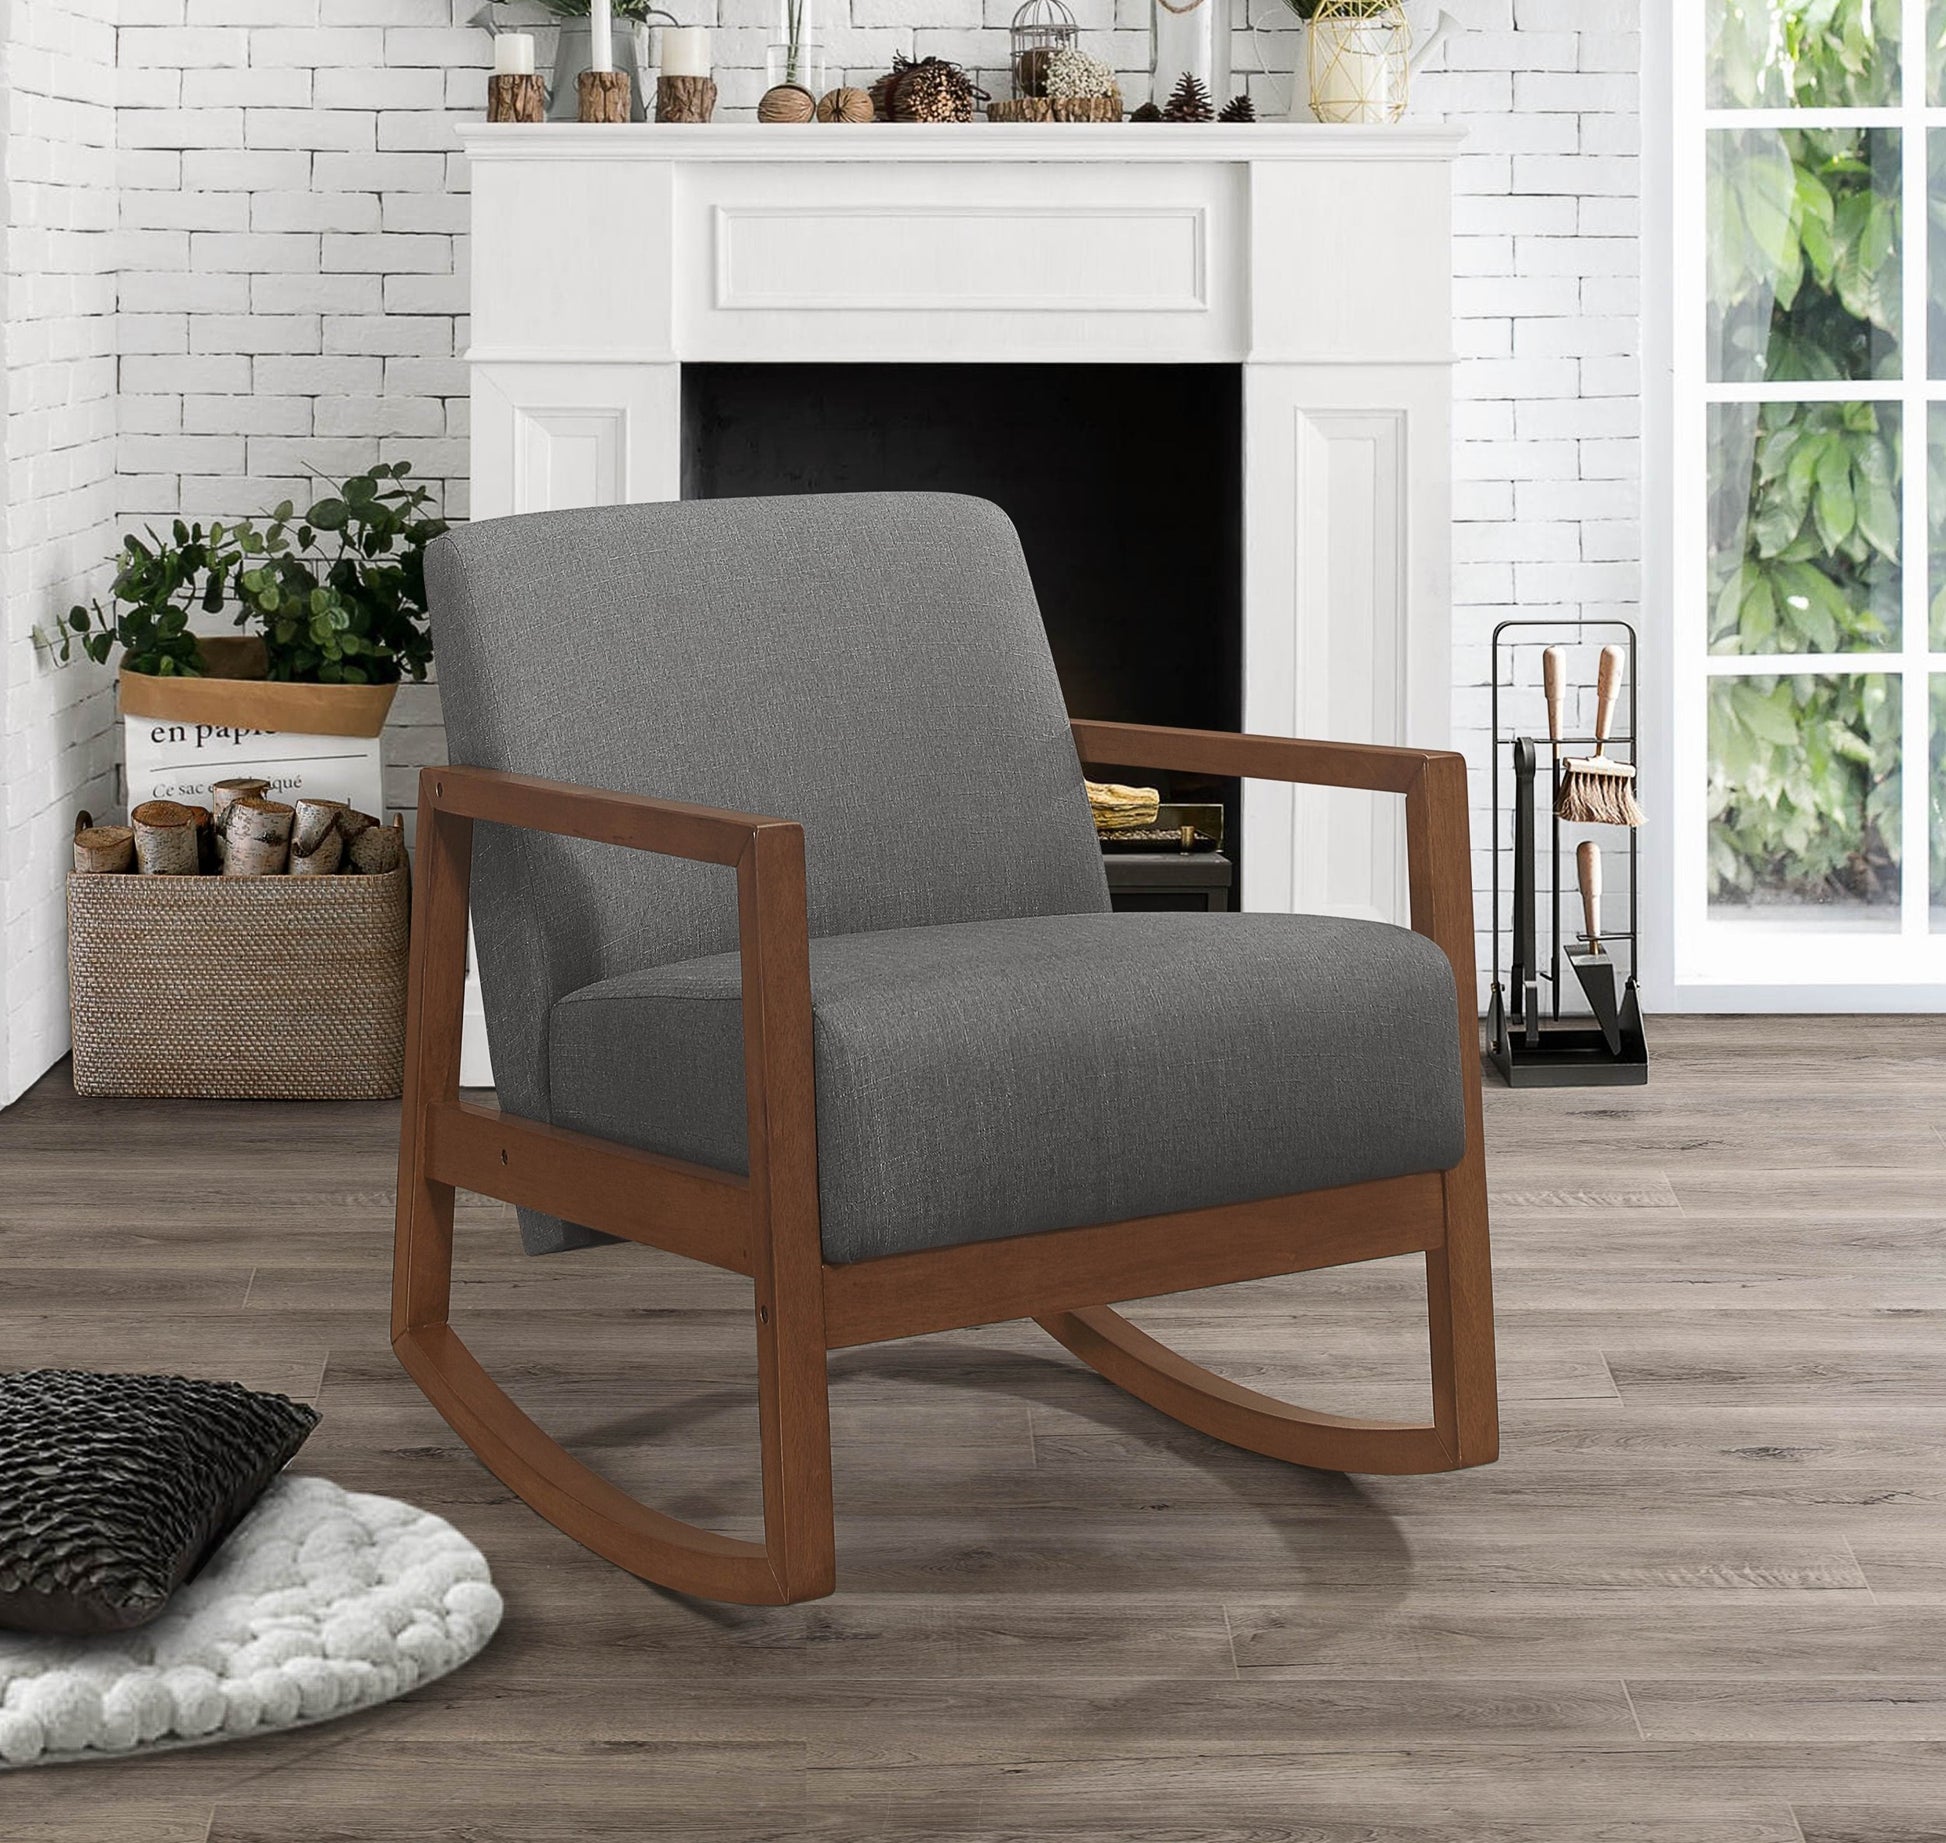 1pc Rocker Accent Chair Modern Living Room Plush gray-primary living space-modern-solid wood